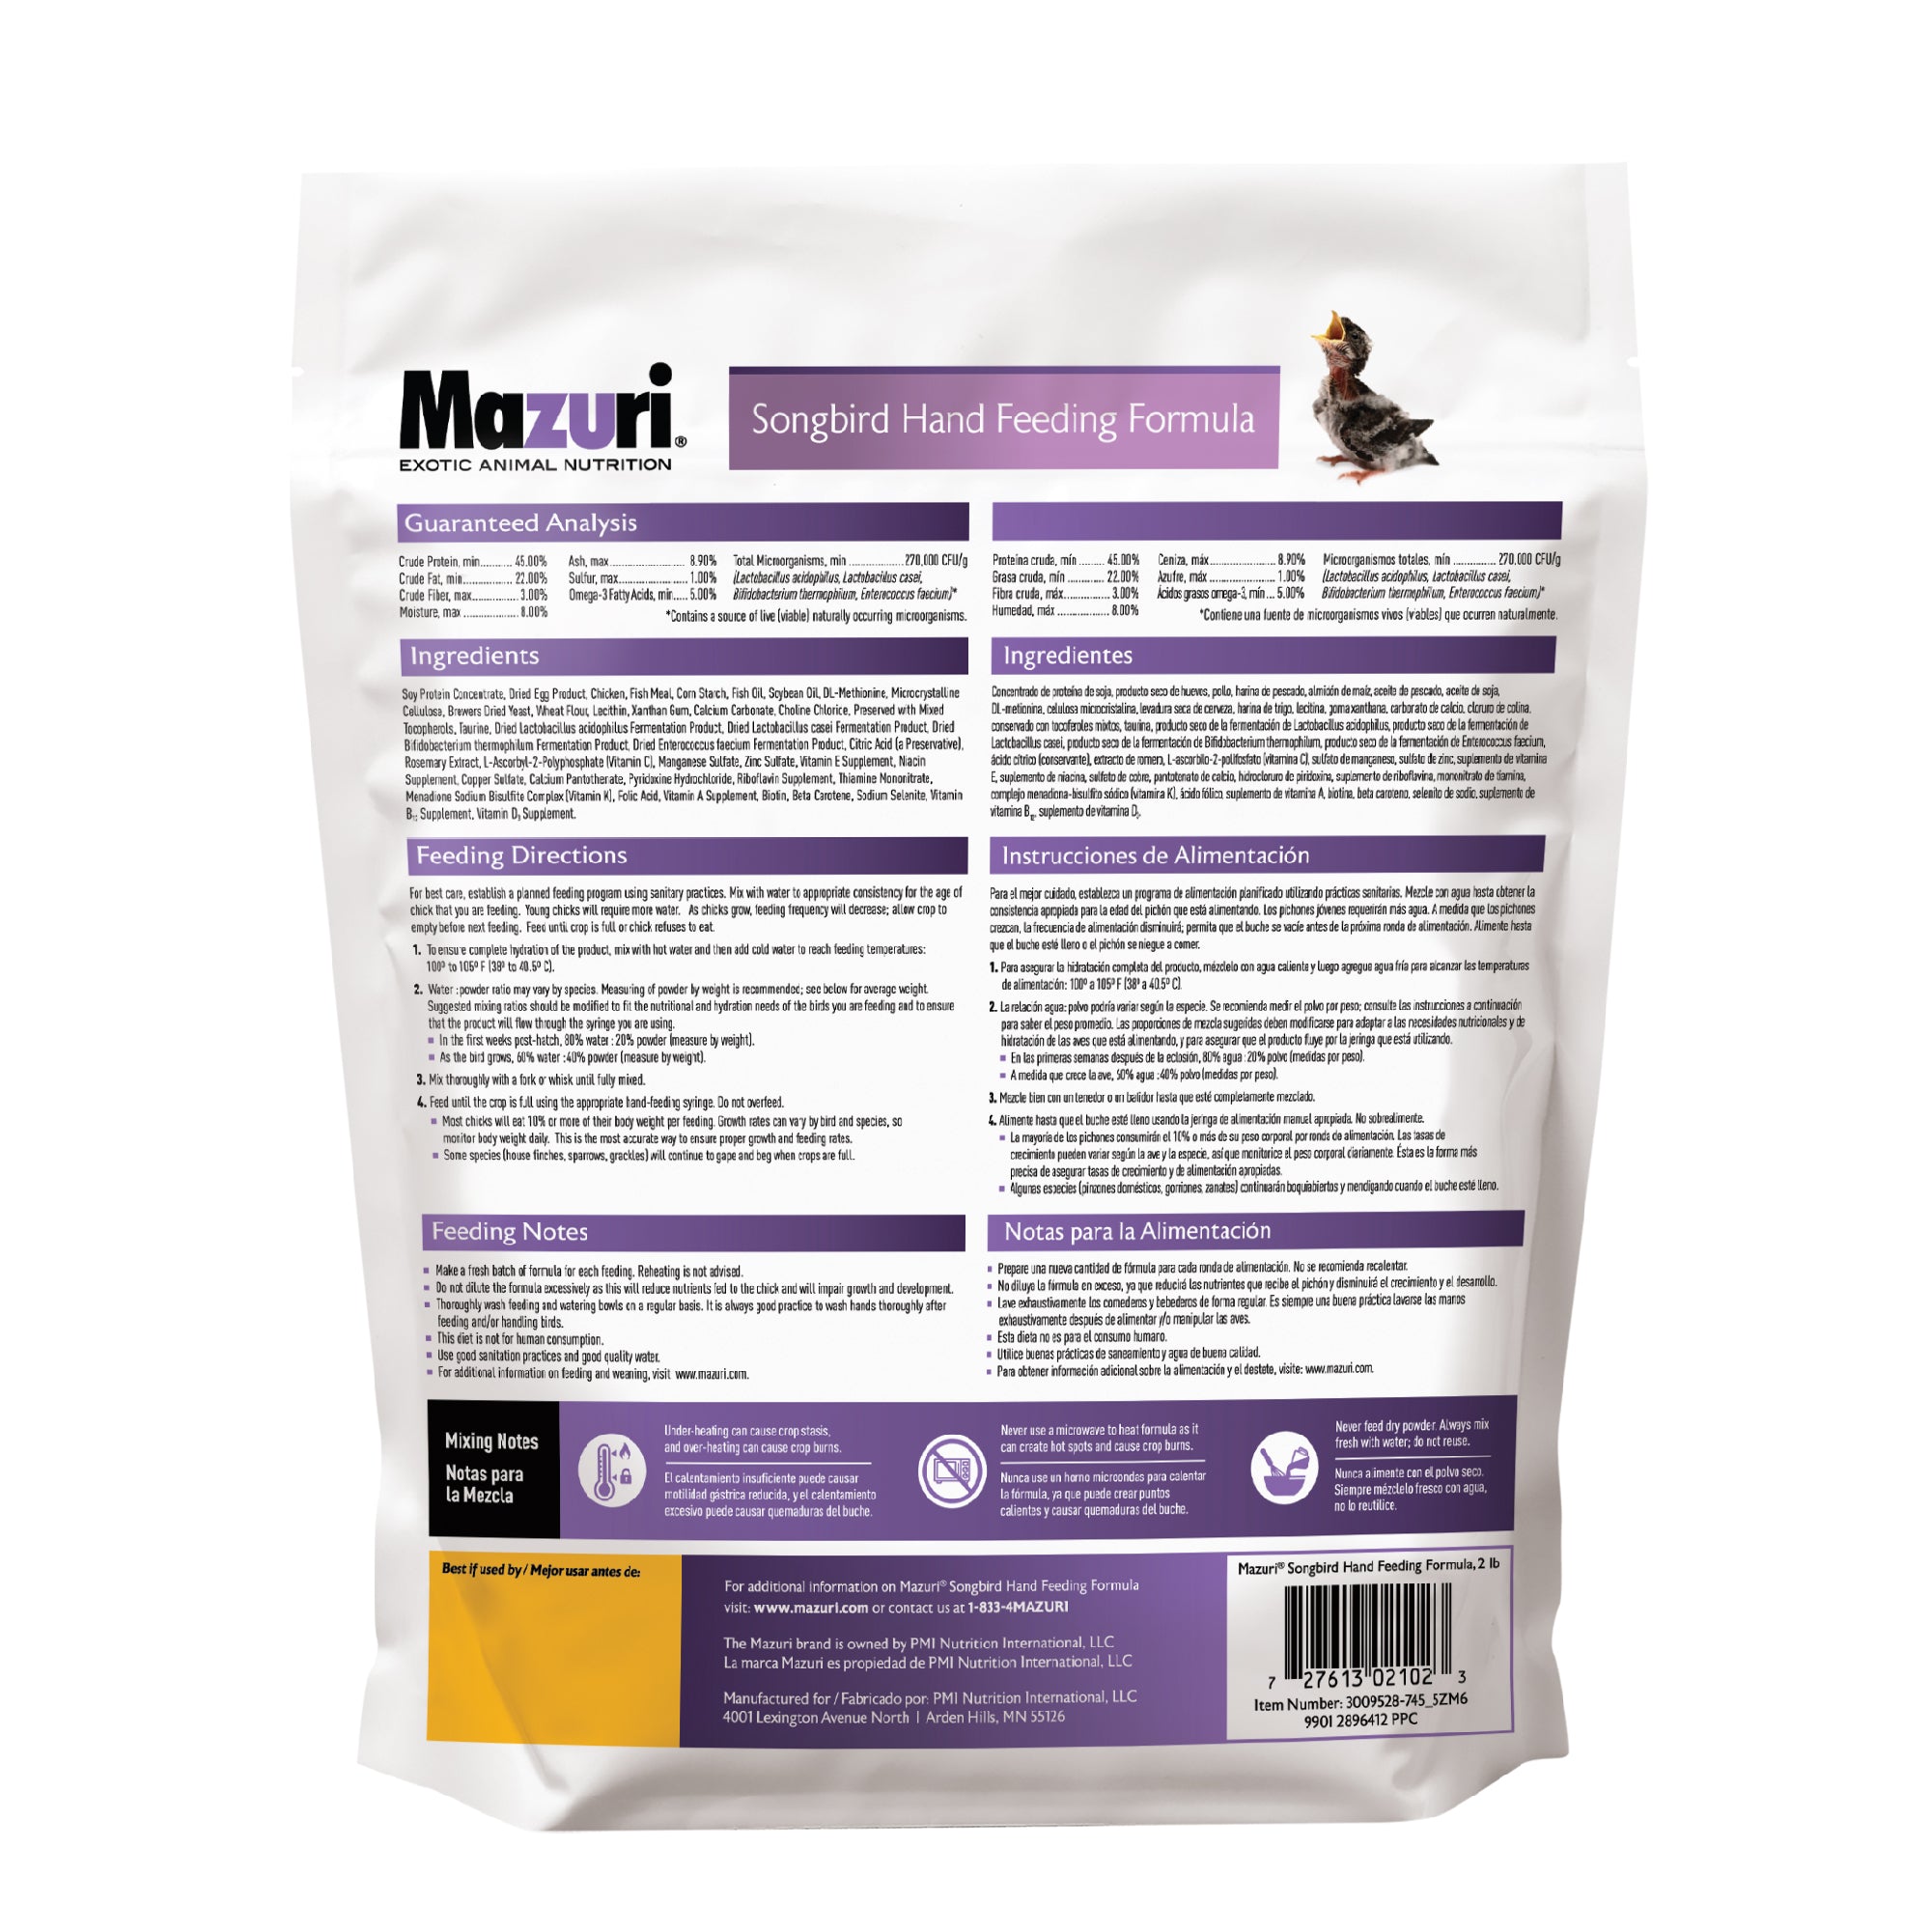 Songbird Hand Feeding Formula bag back with product information